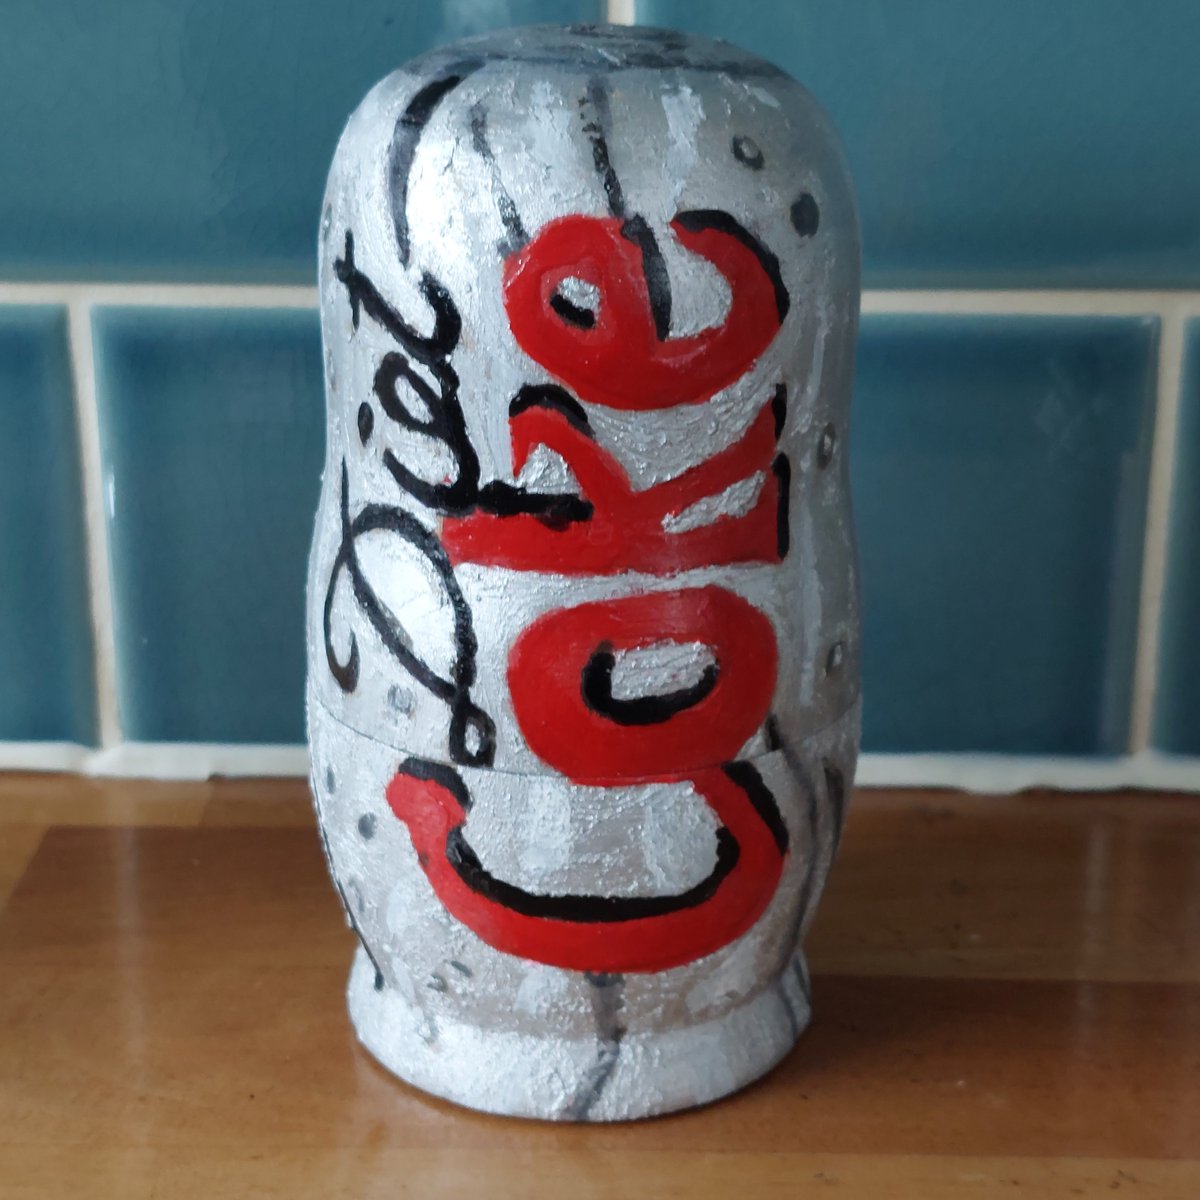 👇 My creation from an #extremepregnancysickness workshop @WEISS_UCL  with artist Sarah Dixon. At times diet coke was all I could stomach when suffering from dry #HyperemesisGravidarum #HG @notmorningsick  🧵1/3